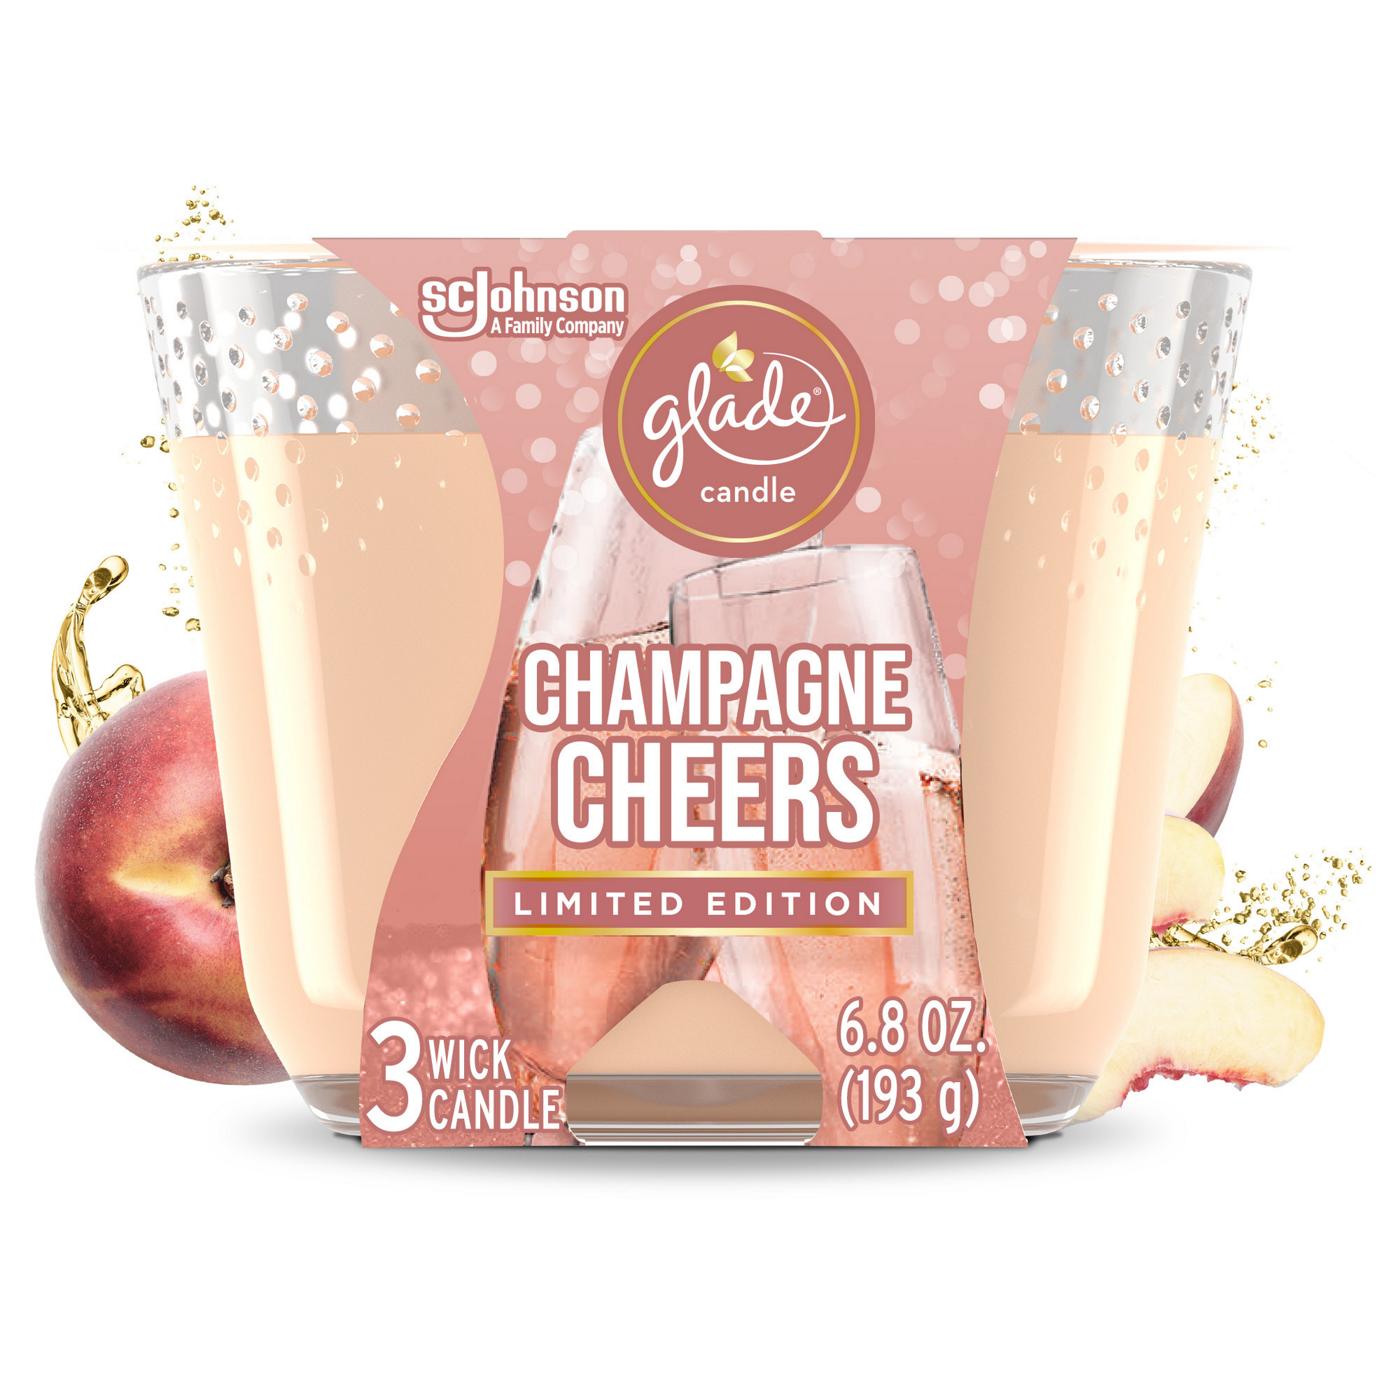 Glade Champagne Cheers 3 Wick Candle; image 1 of 2